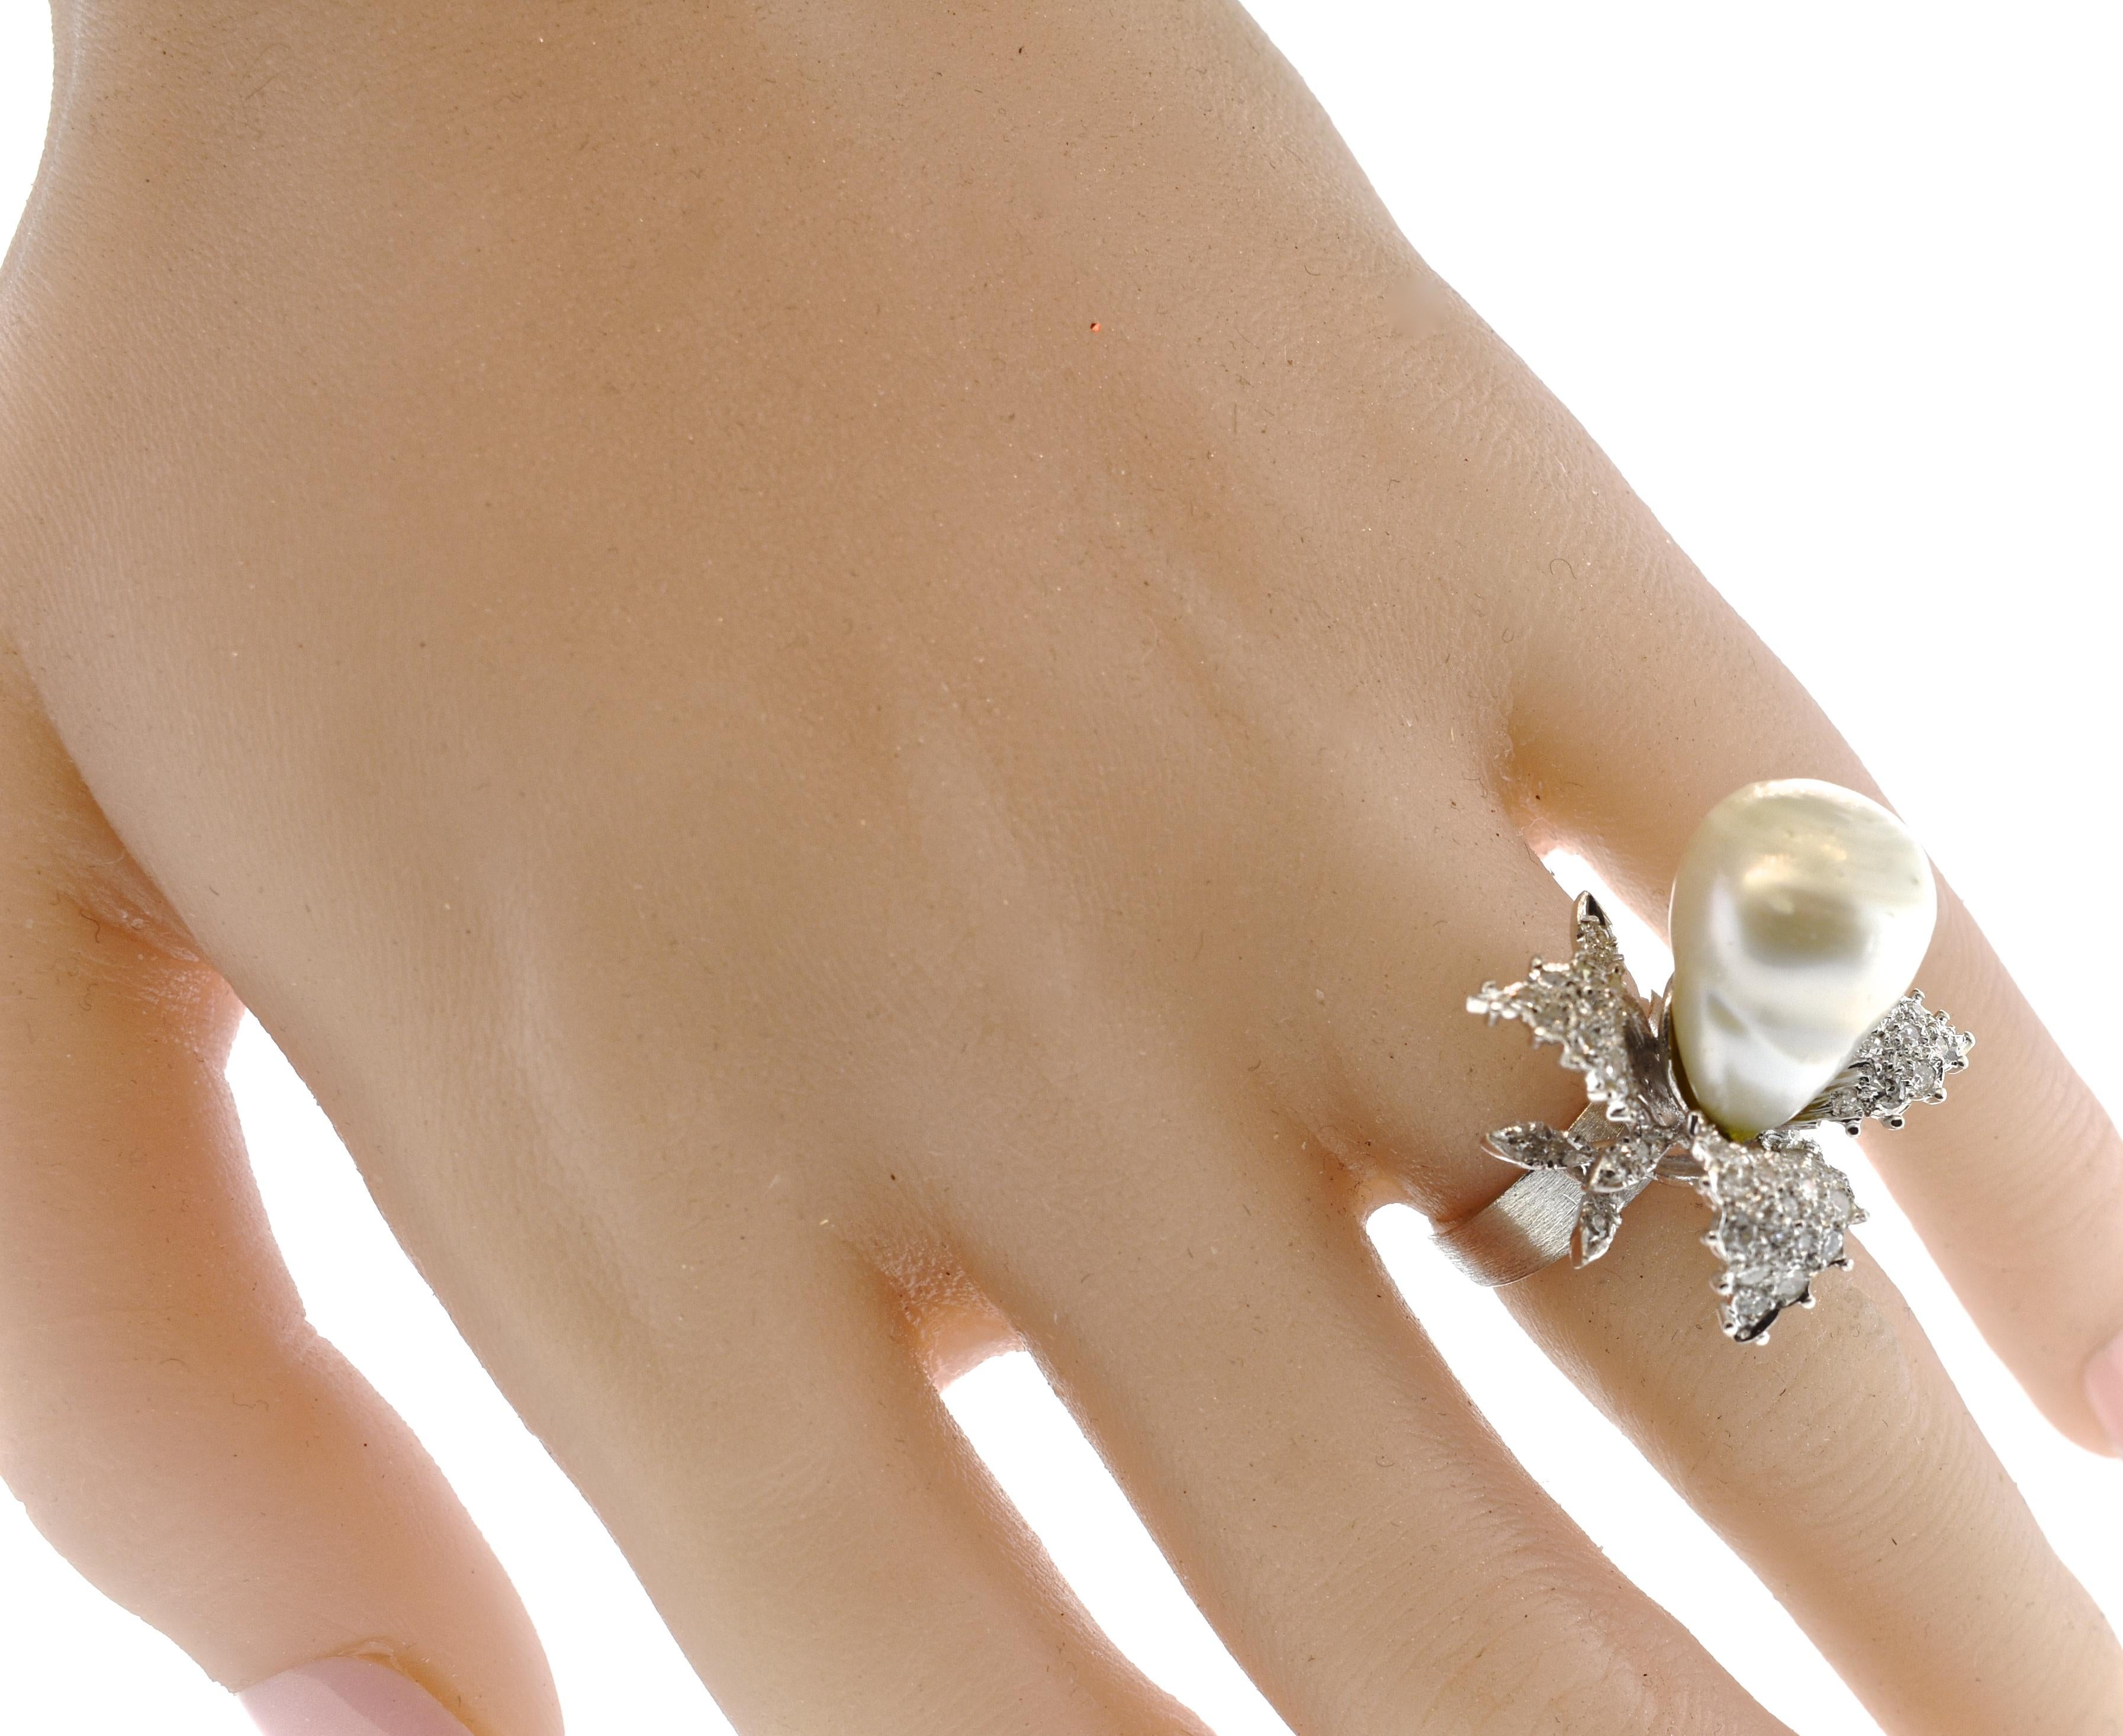 Baroque pearl set in and center and accented with over 50 white diamonds, pave set in the 